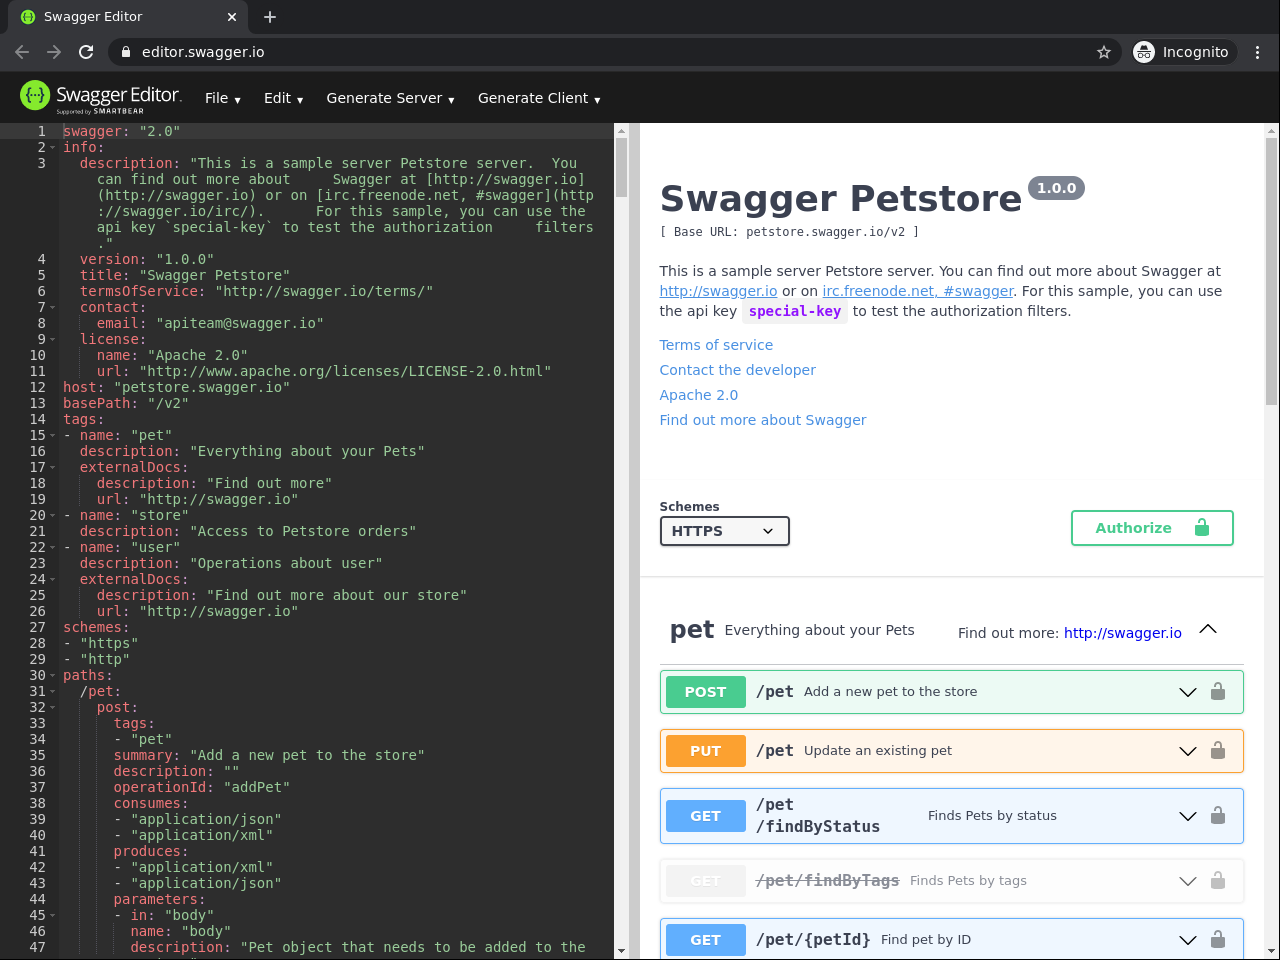 usin swagger editor and changing request url